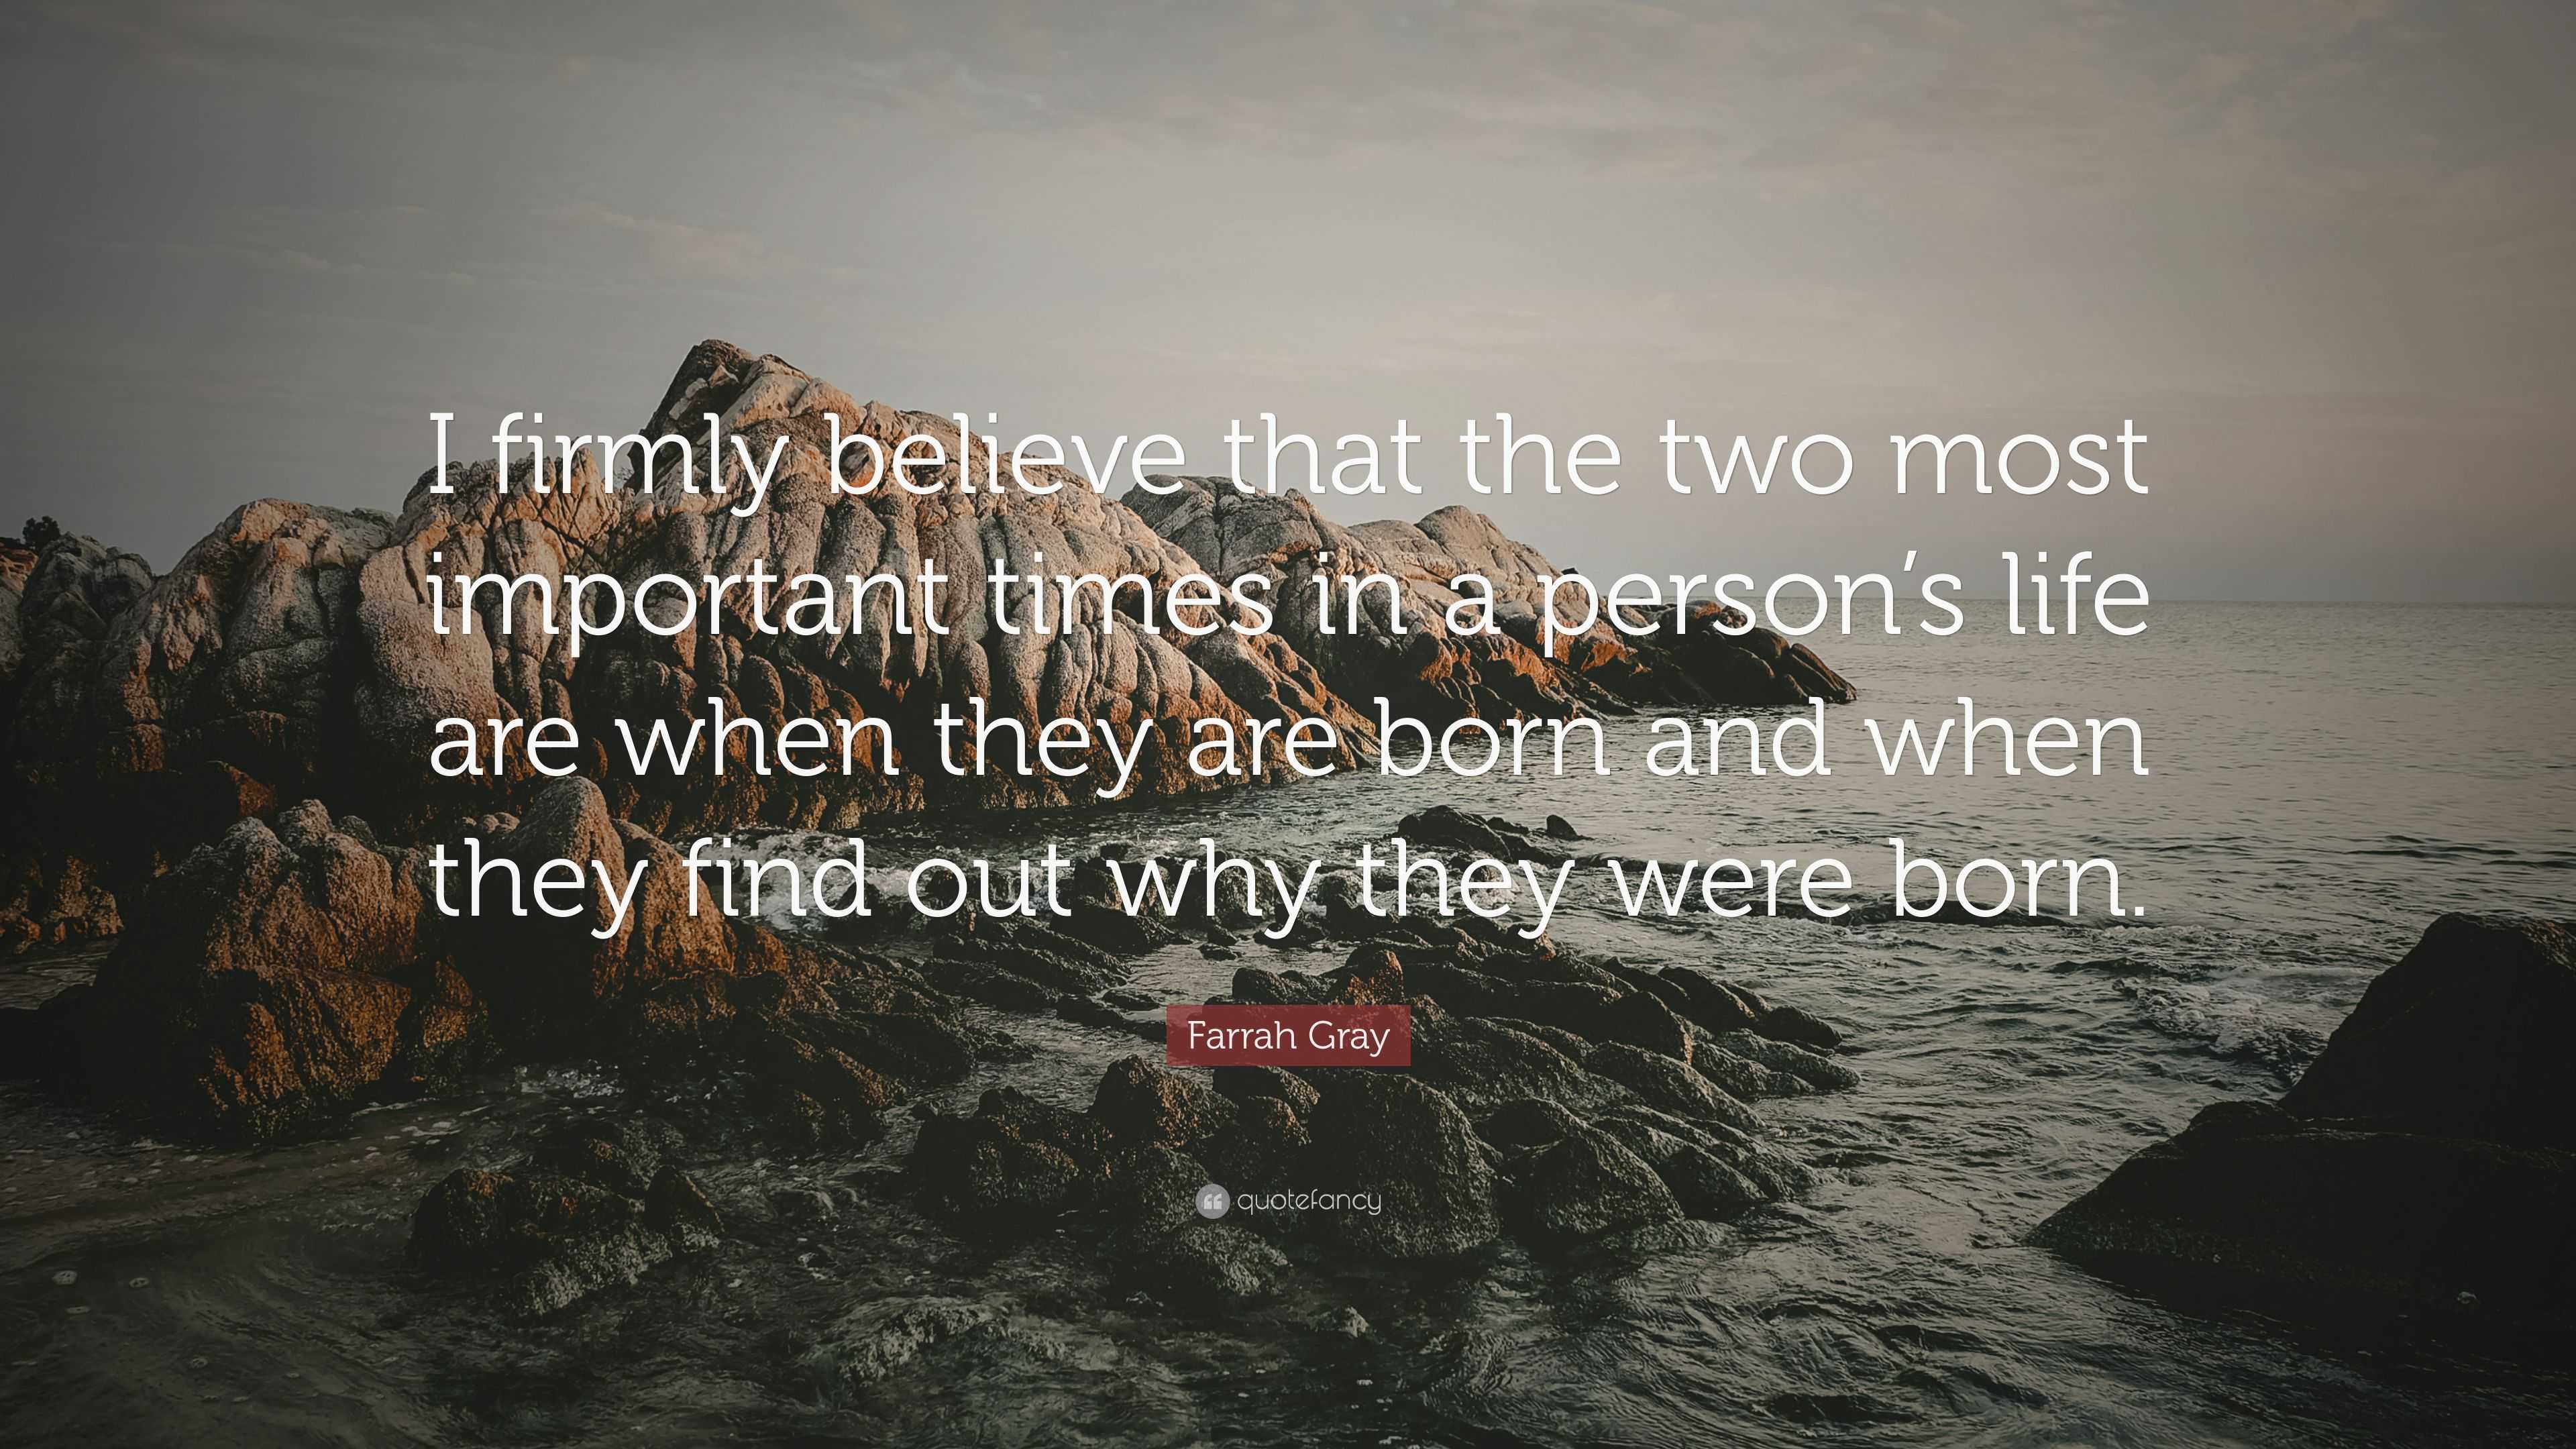 Farrah Gray Quote: “I firmly believe that the two most important times ...